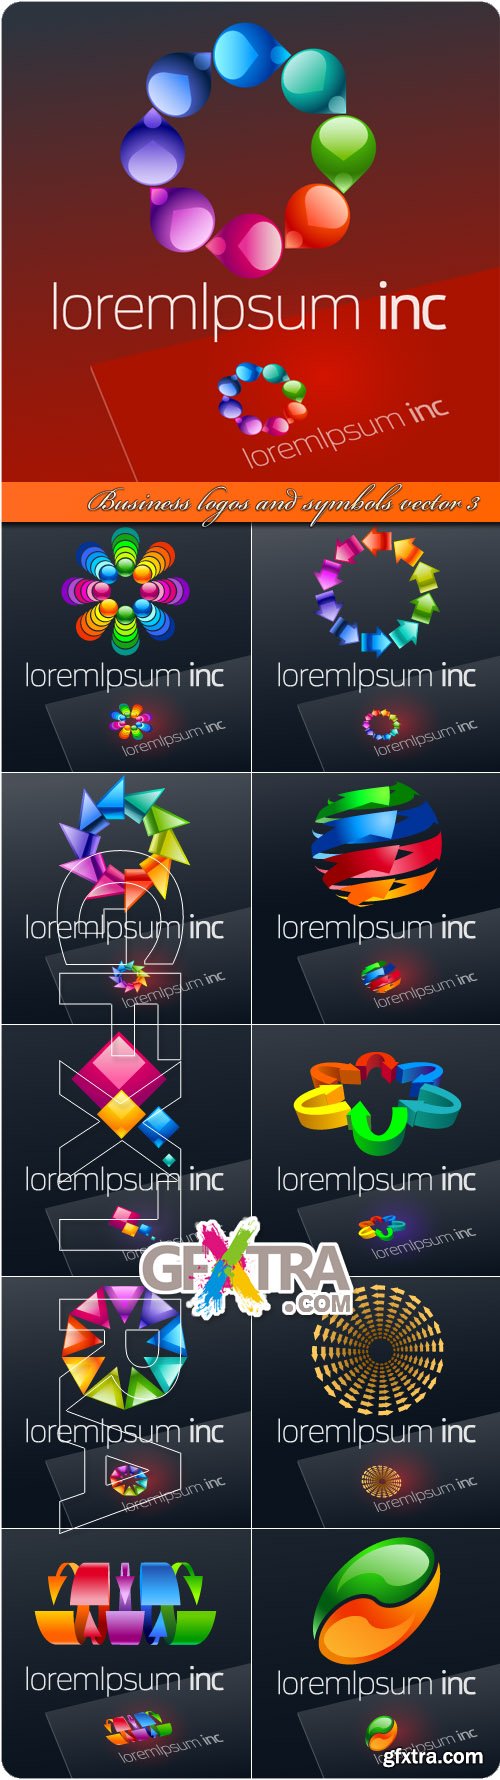 Business logos and symbols vector 3